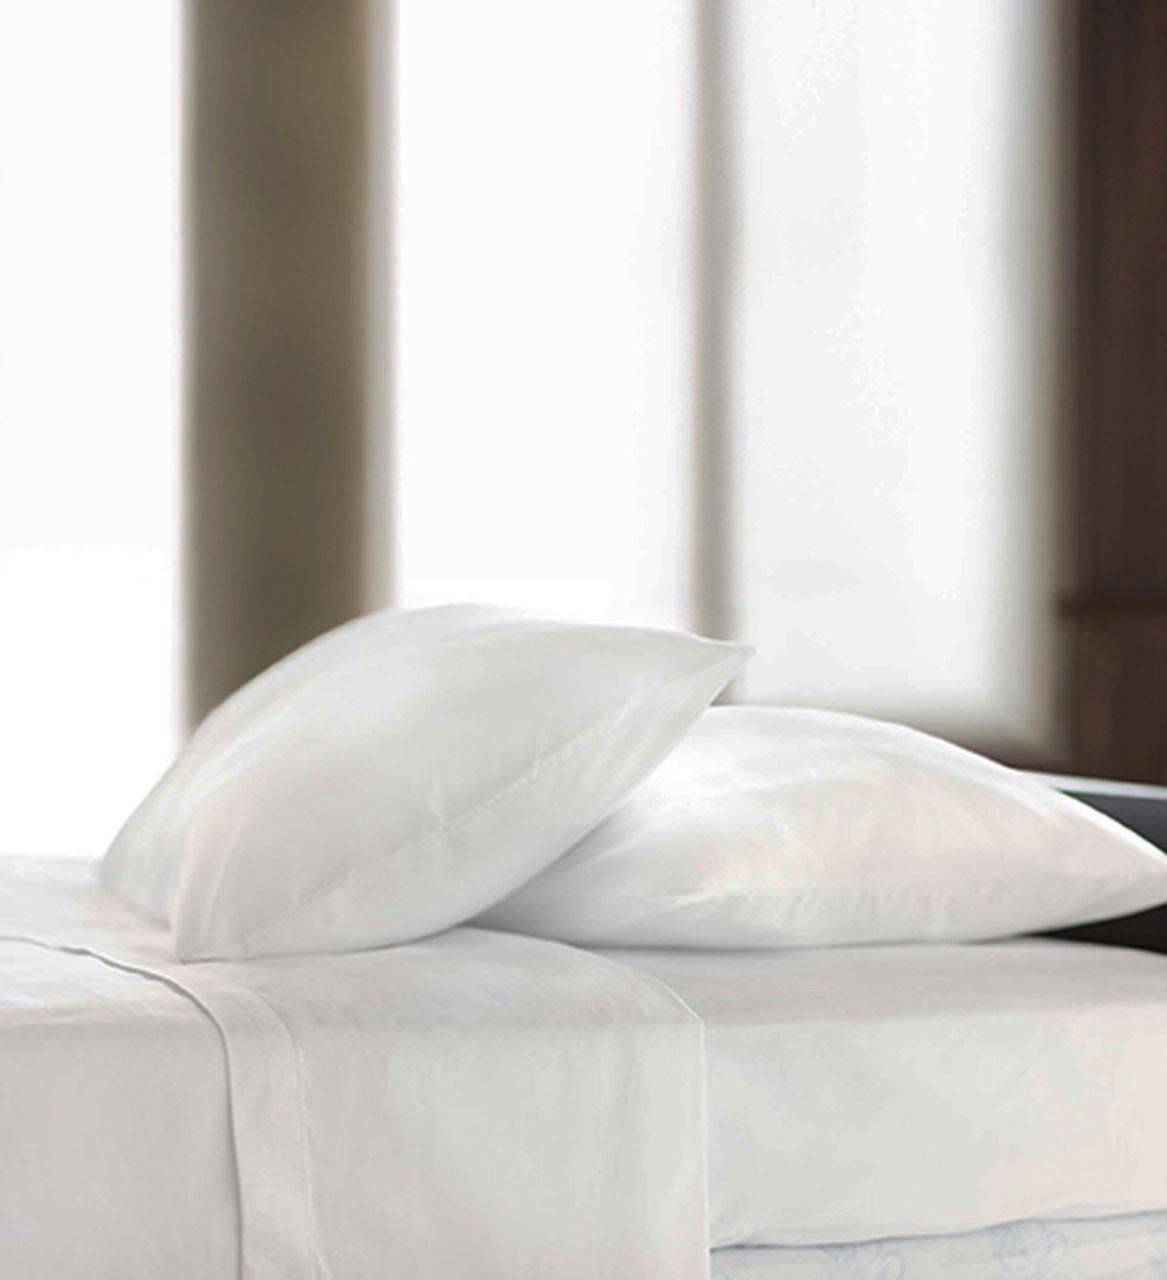 What should guests expect from centium satin sheets?